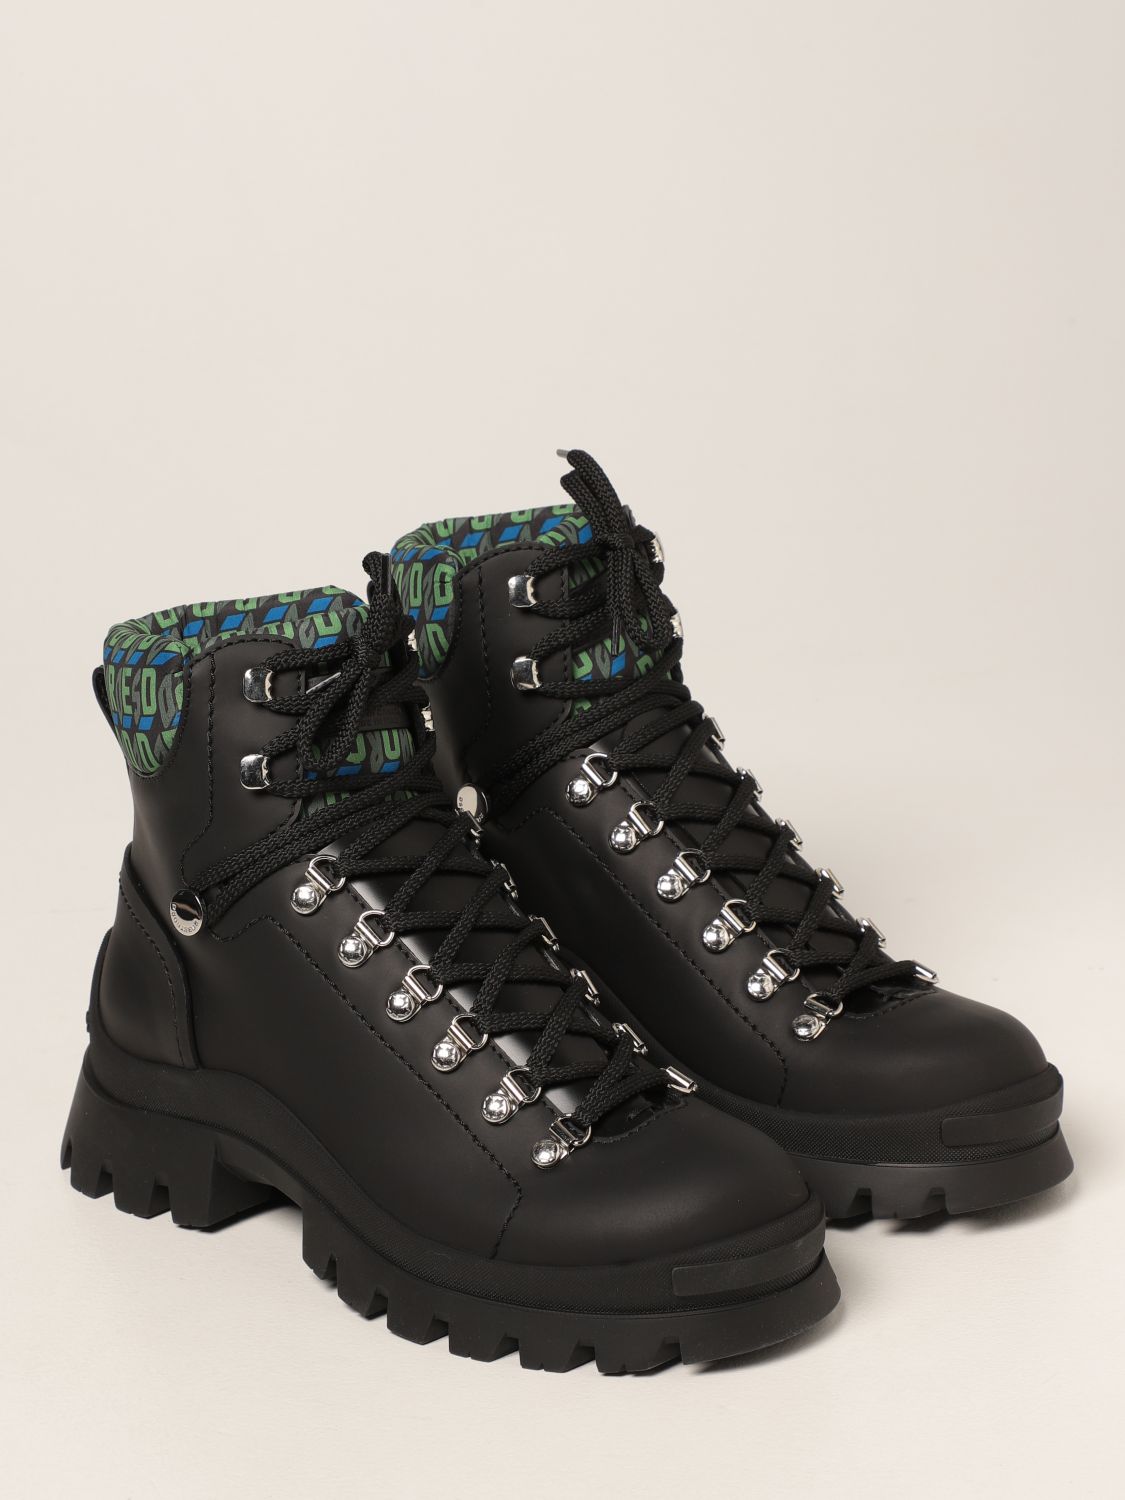 DSQUARED2: boots in rubberized leather - Black | Dsquared2 boots